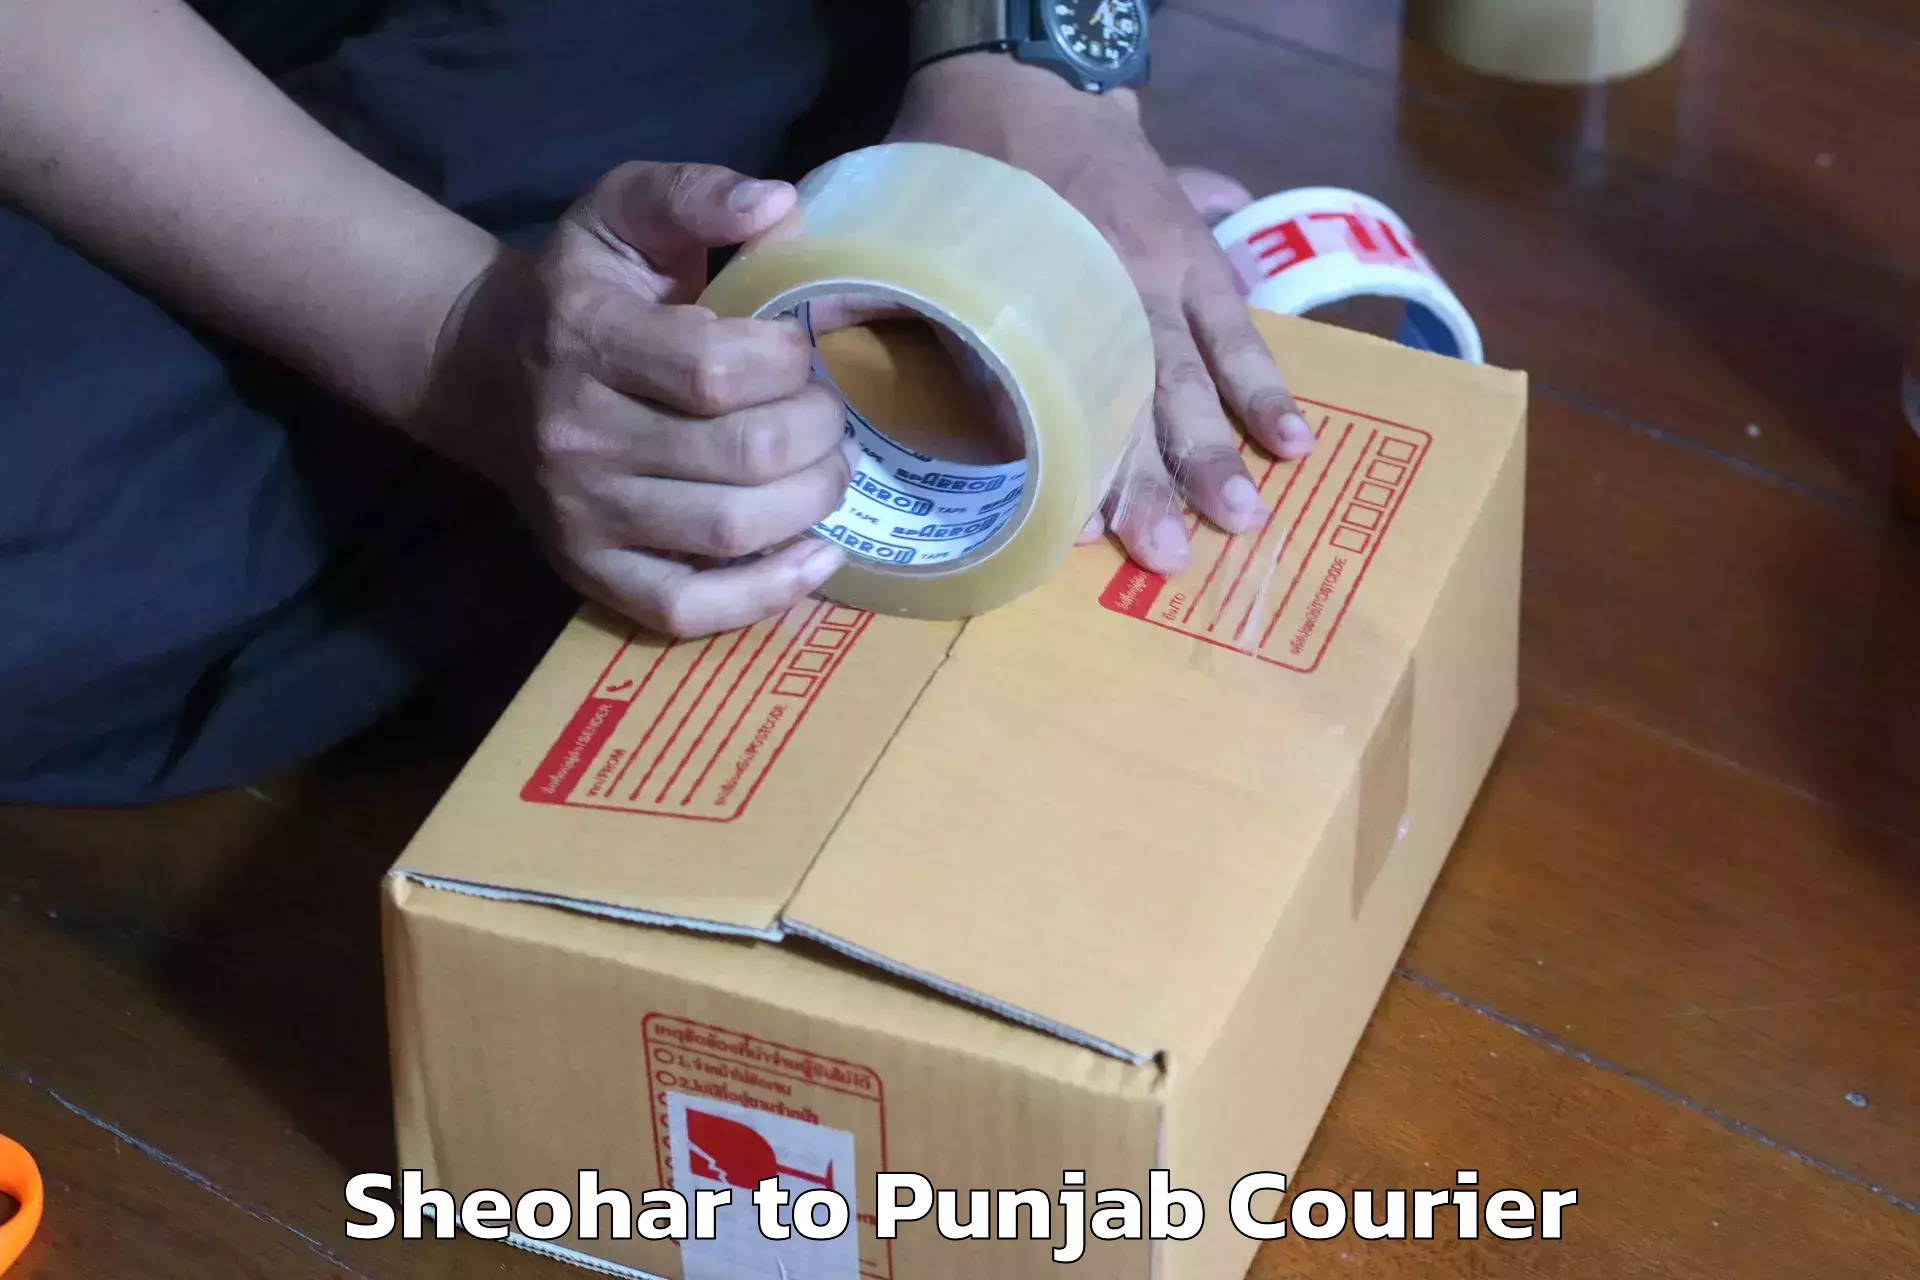 Skilled furniture movers Sheohar to Amritsar